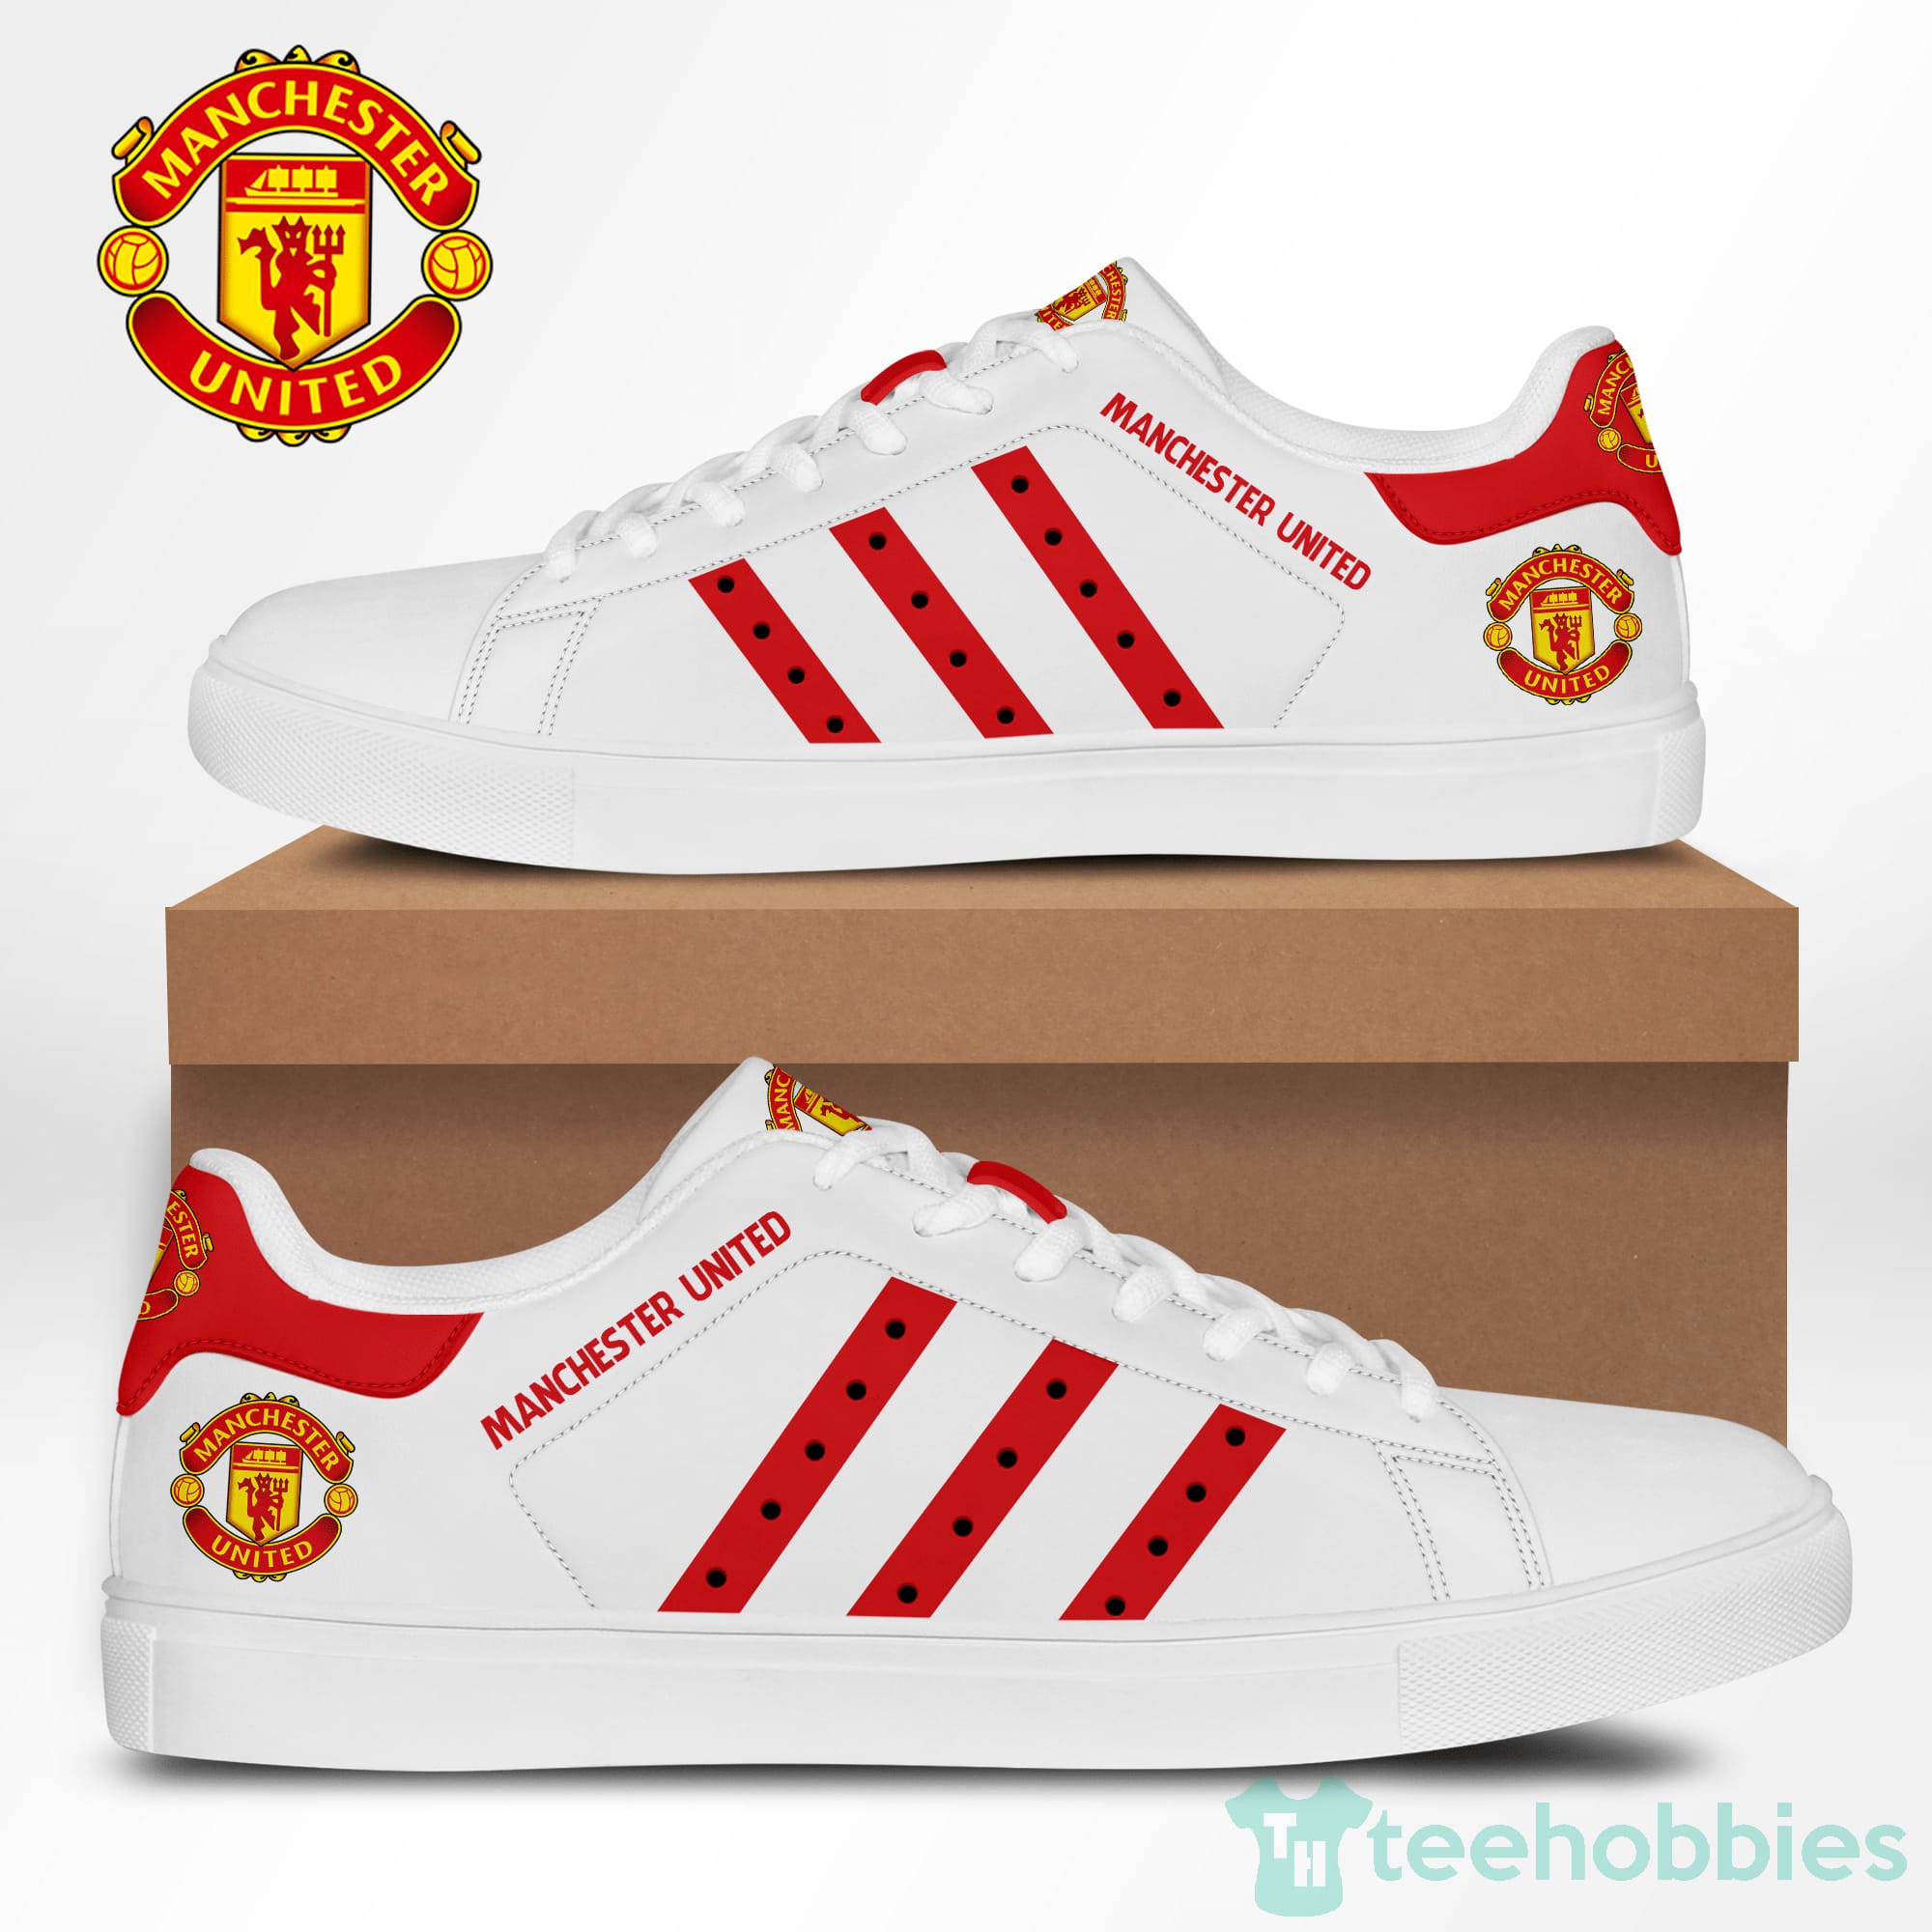 Manchester United Fc White Low Top Skate Shoes Product photo 1